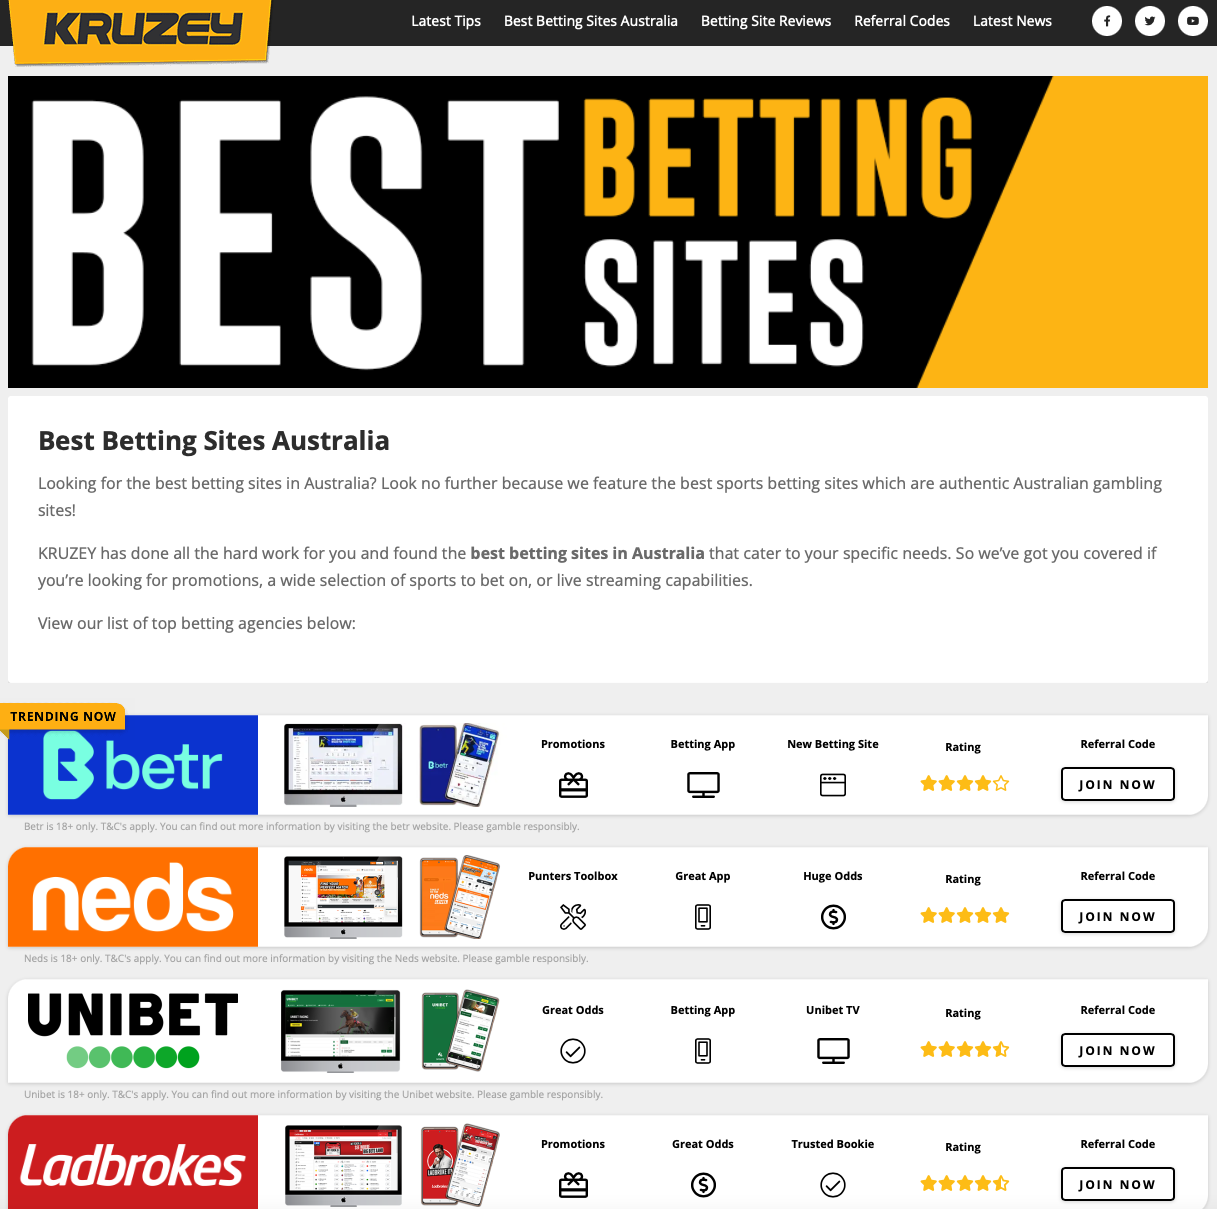 How To Win Clients And Influence Markets with Best Betting Sites